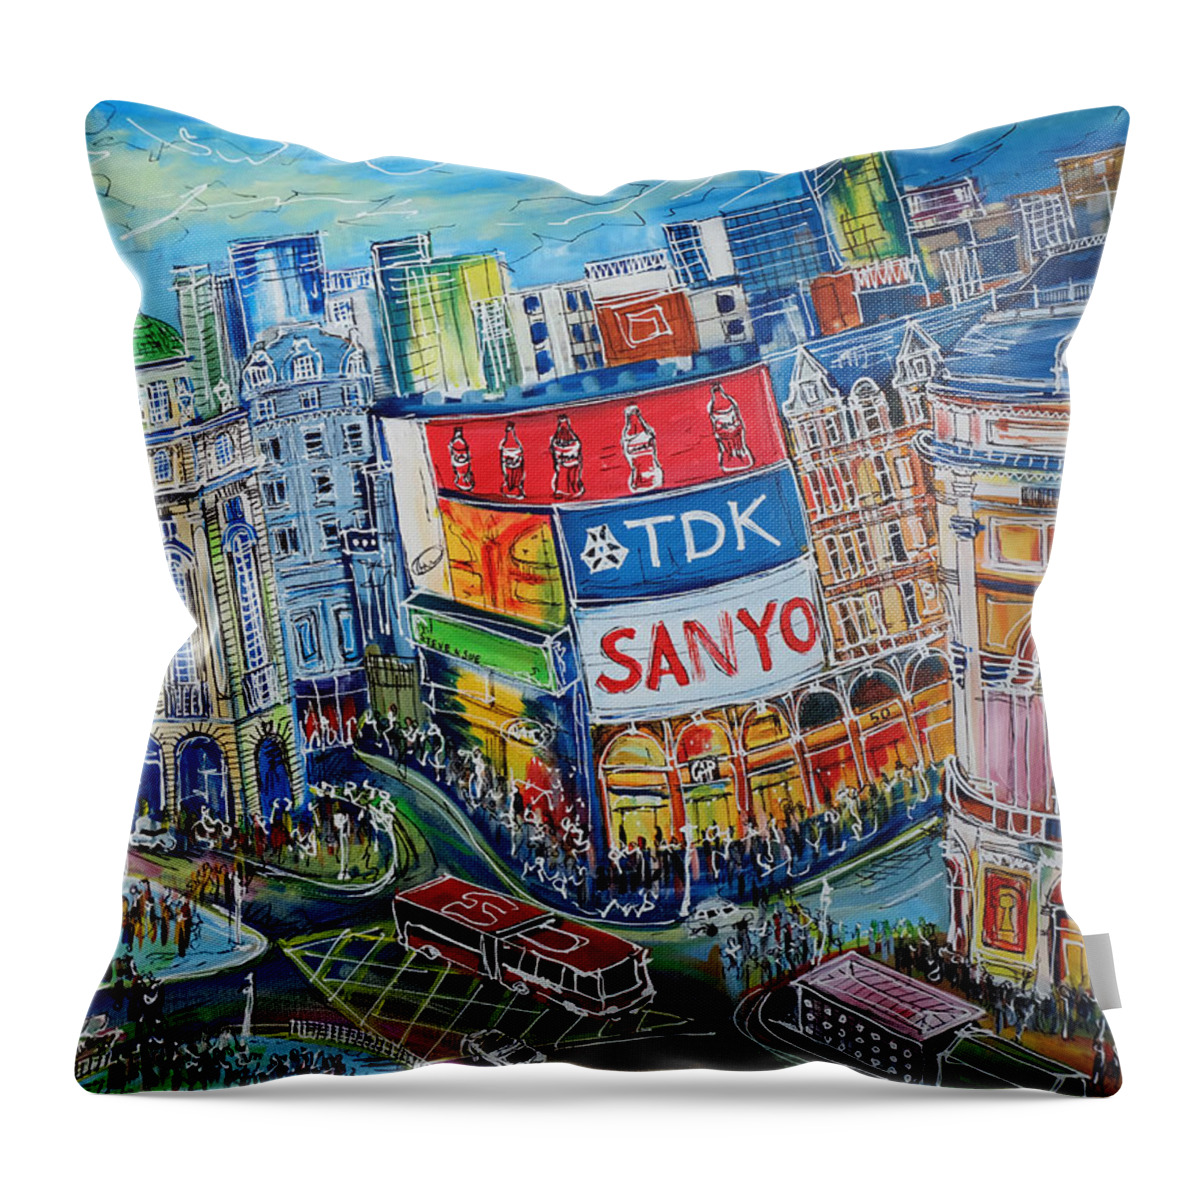 Piccadilly Circus Throw Pillow featuring the painting Piccadilly Circus by Laura Hol Art